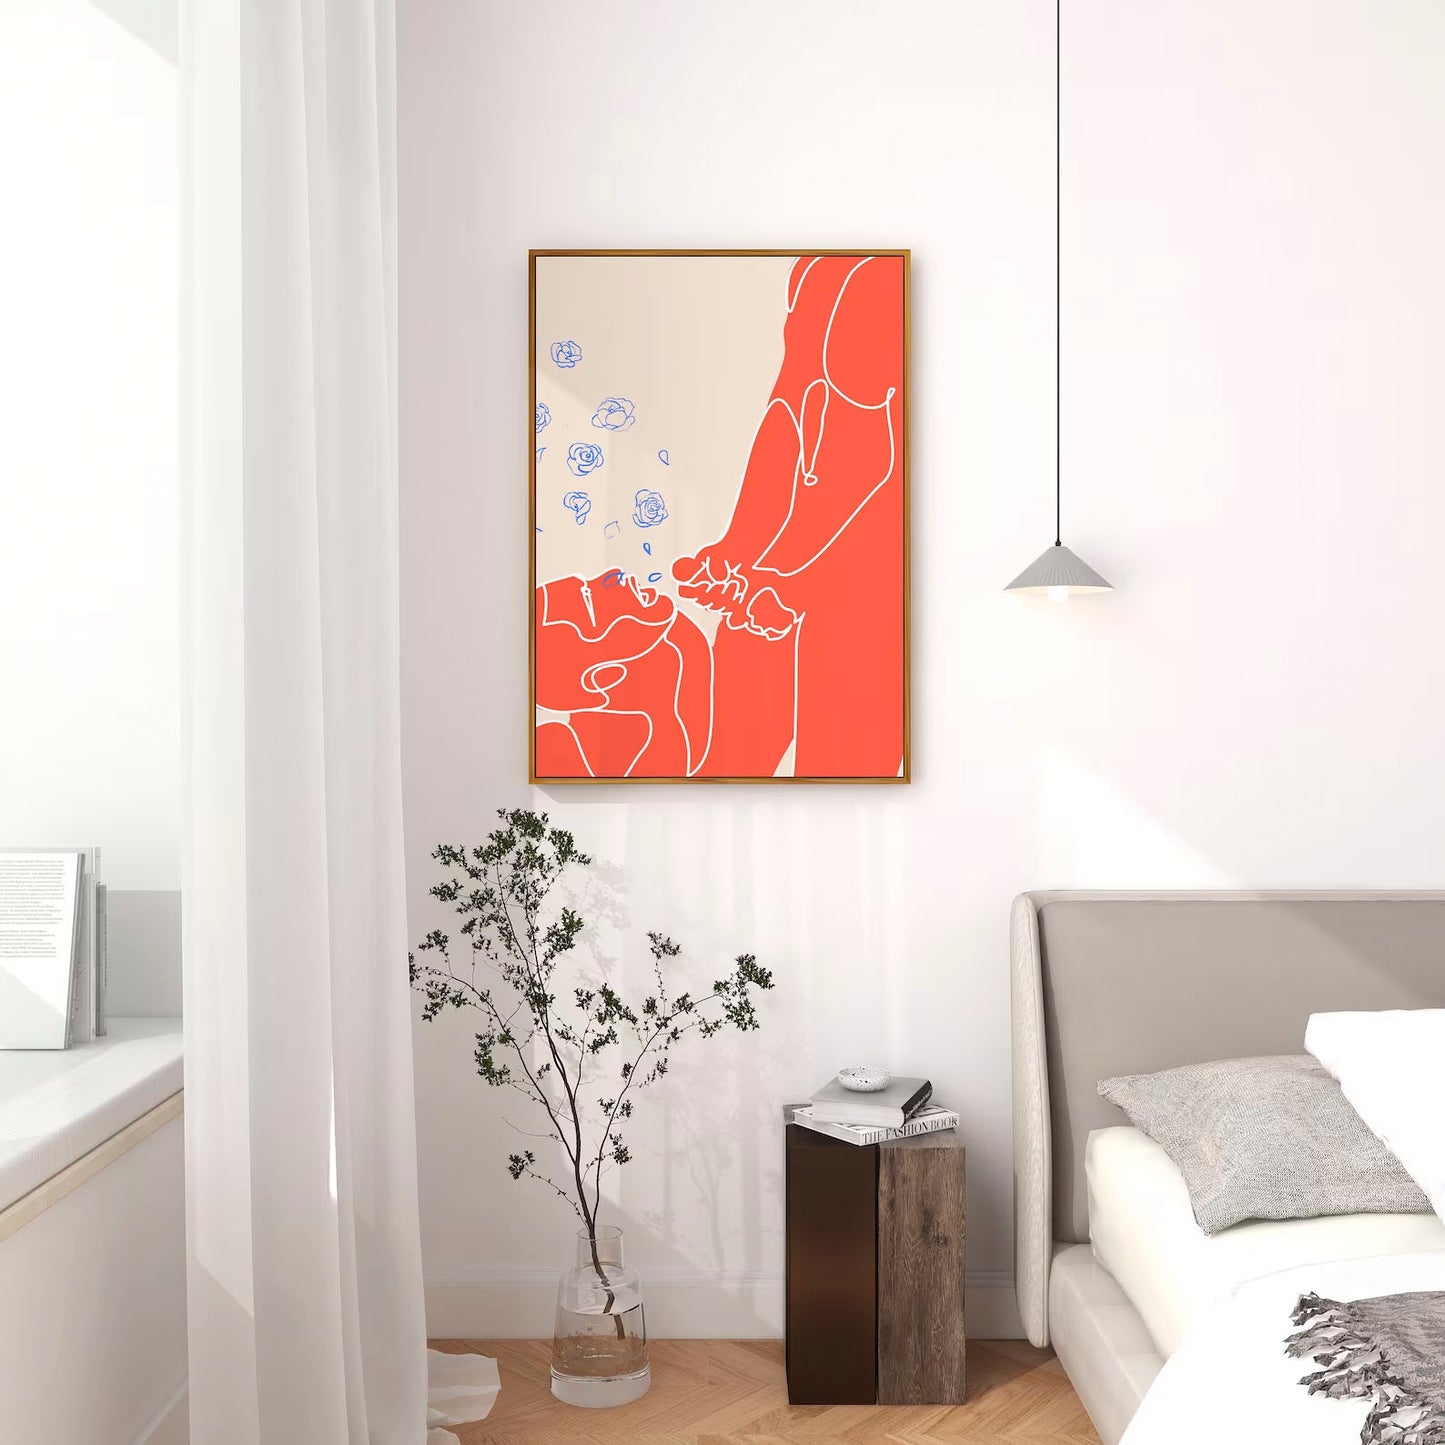 Abstract Gay Couple Wall Art, One Line Drawing Figure Sketch